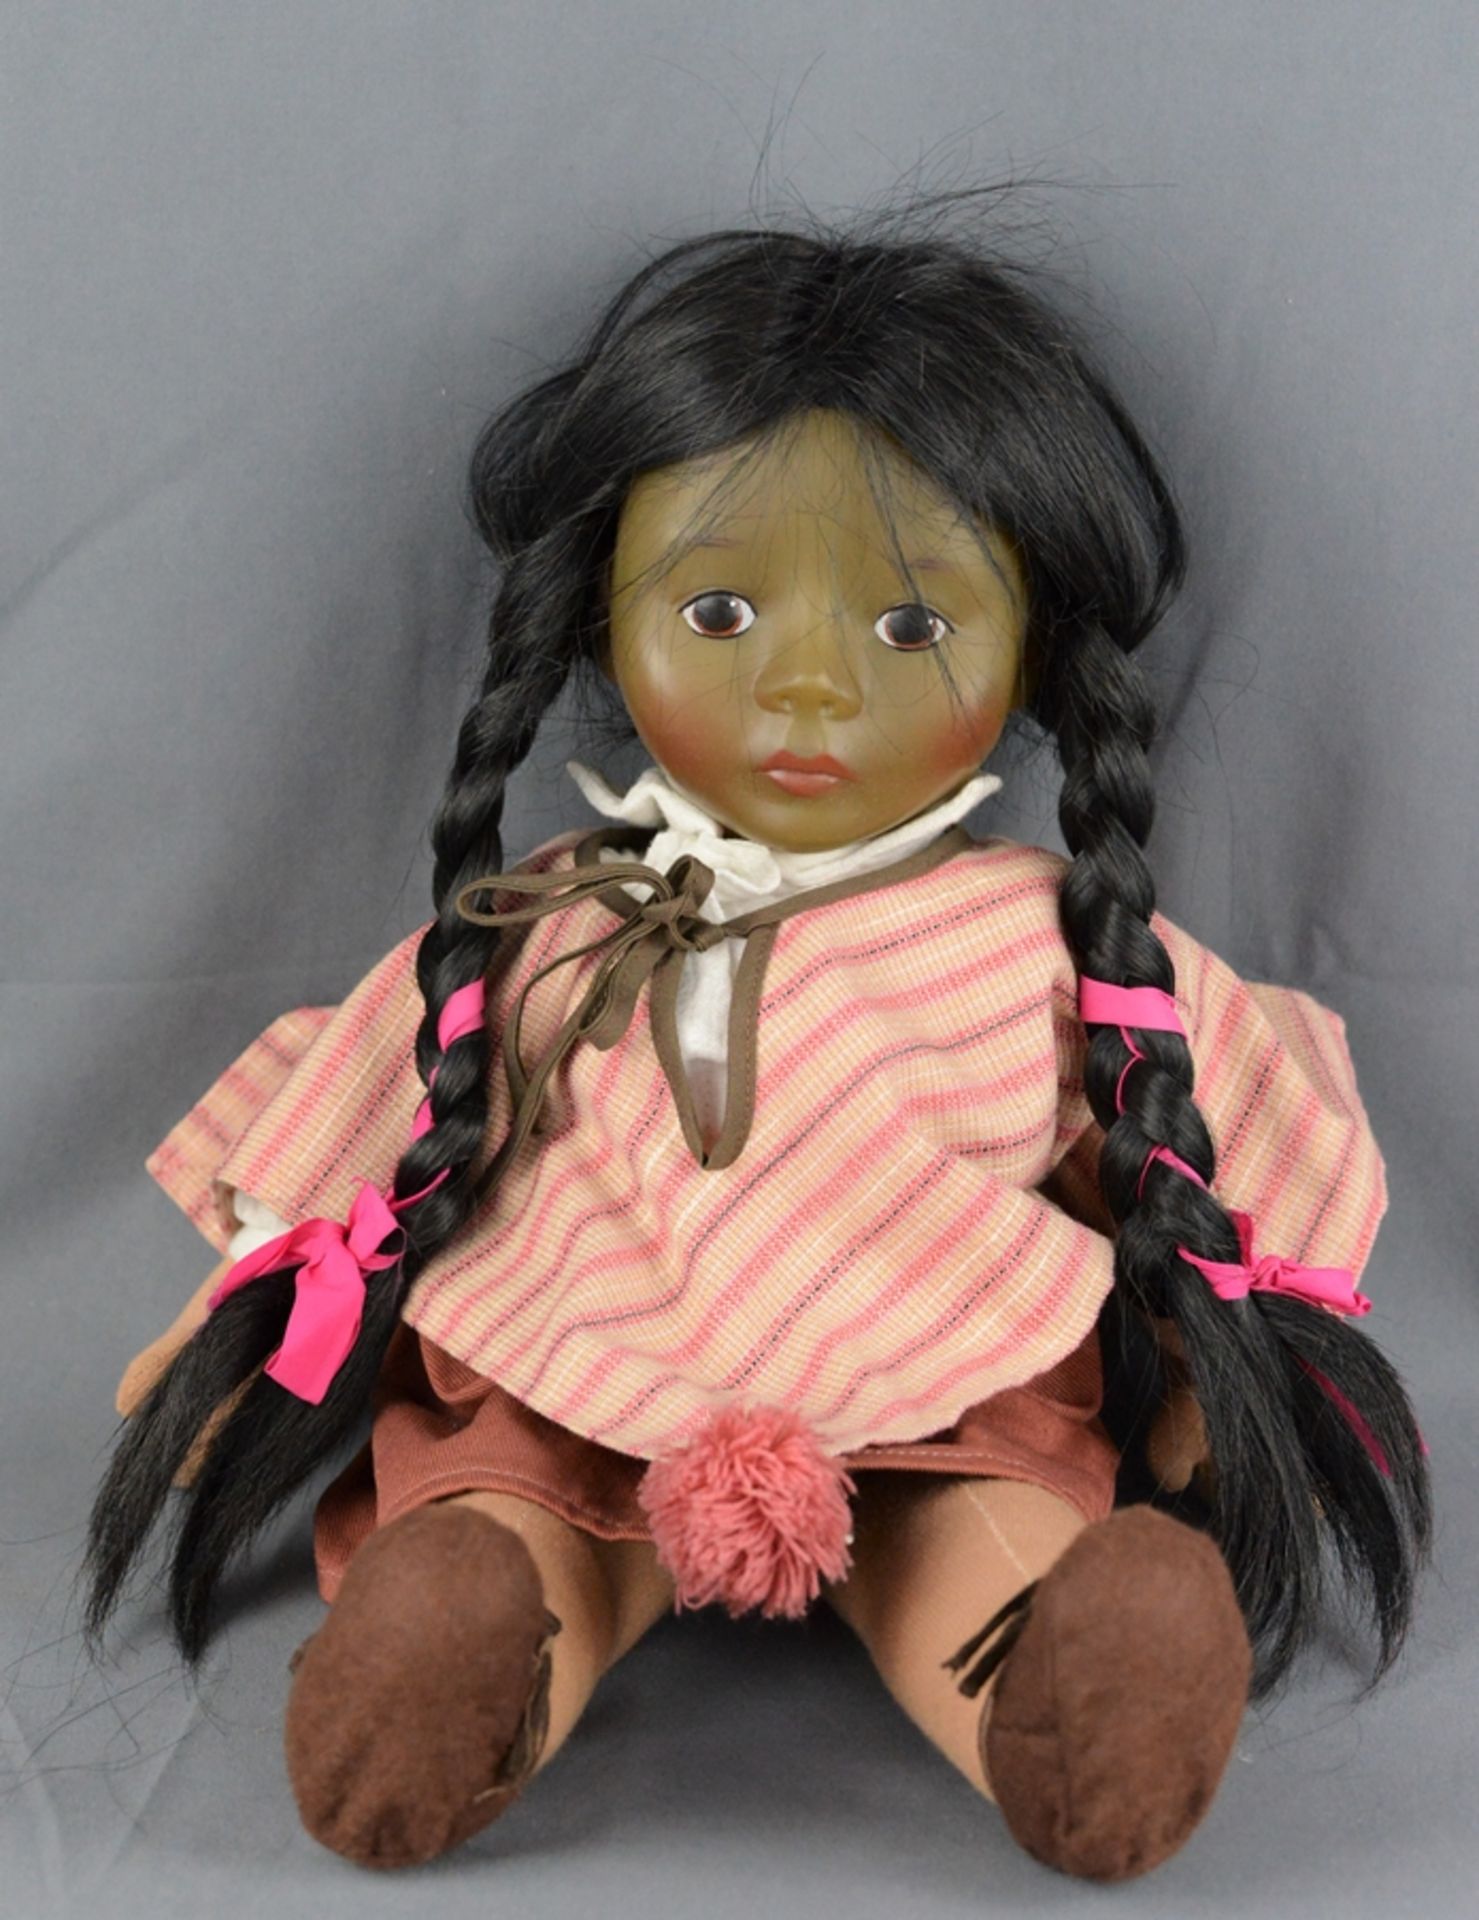 Doll, Creation Marie-Luise, head made of plastic, black hair braided into two pigtails, with stripe